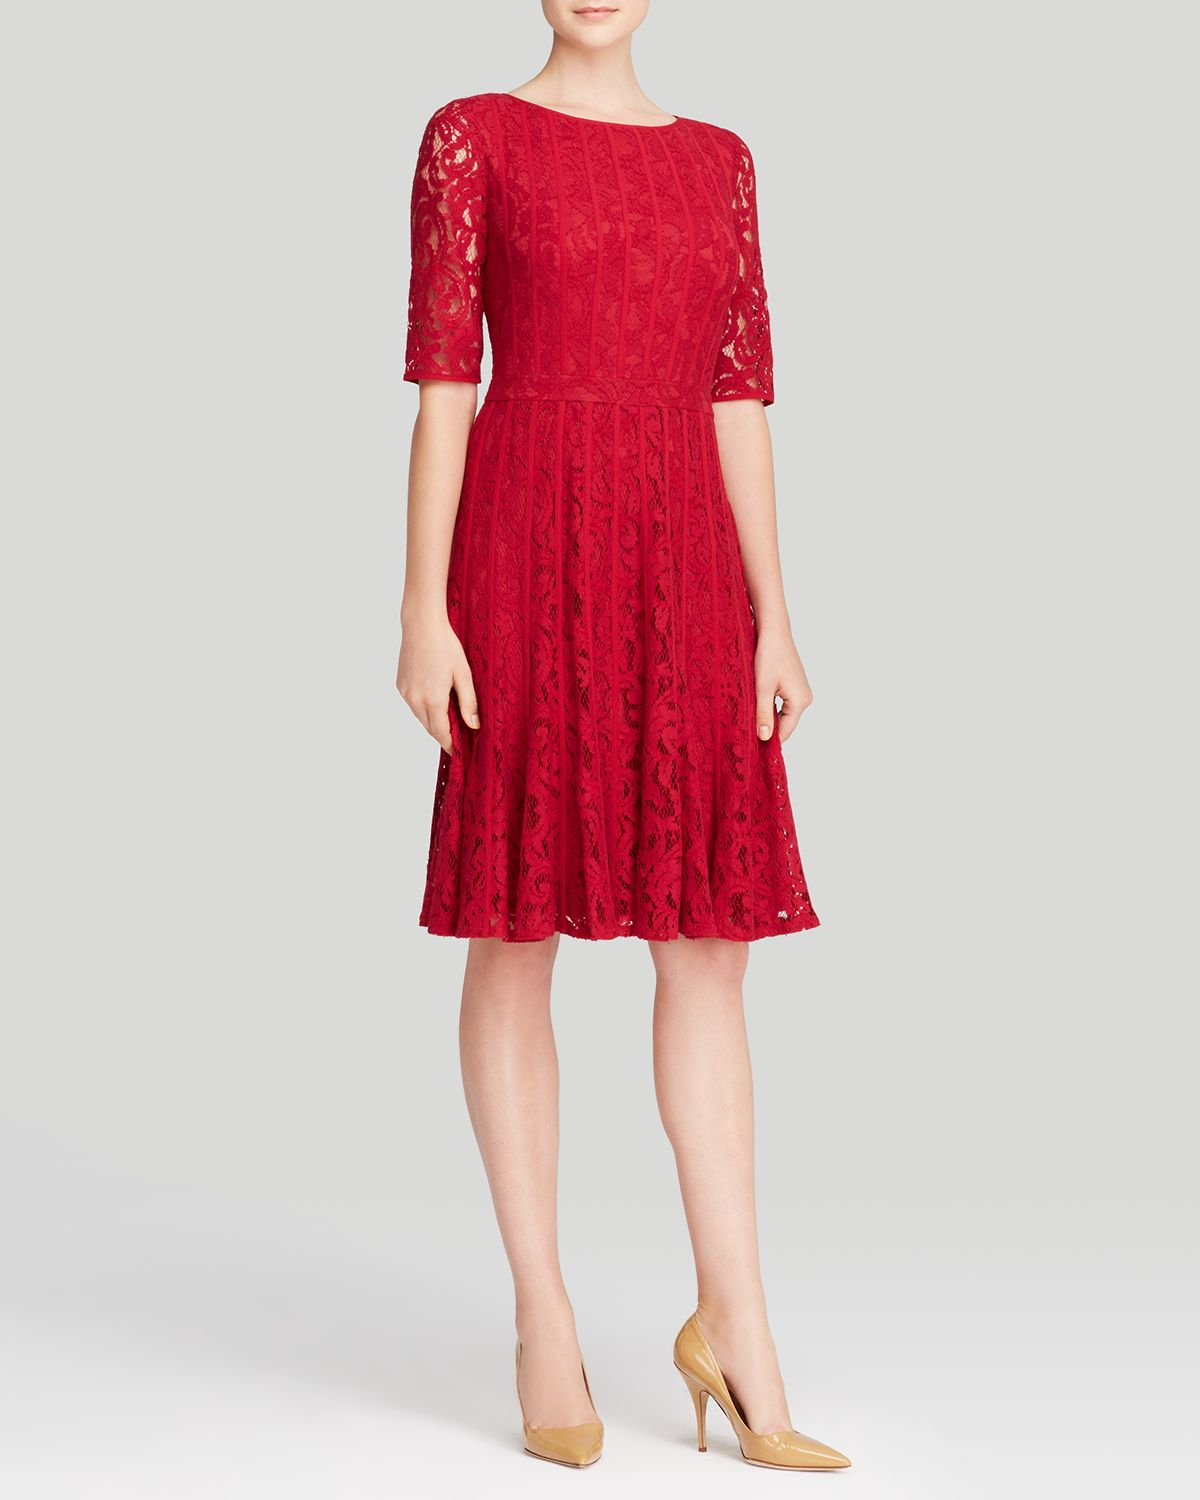 Adrianna Papell Dress - Elbow Sleeve Lace Fit And Flare in Red (Flare ...